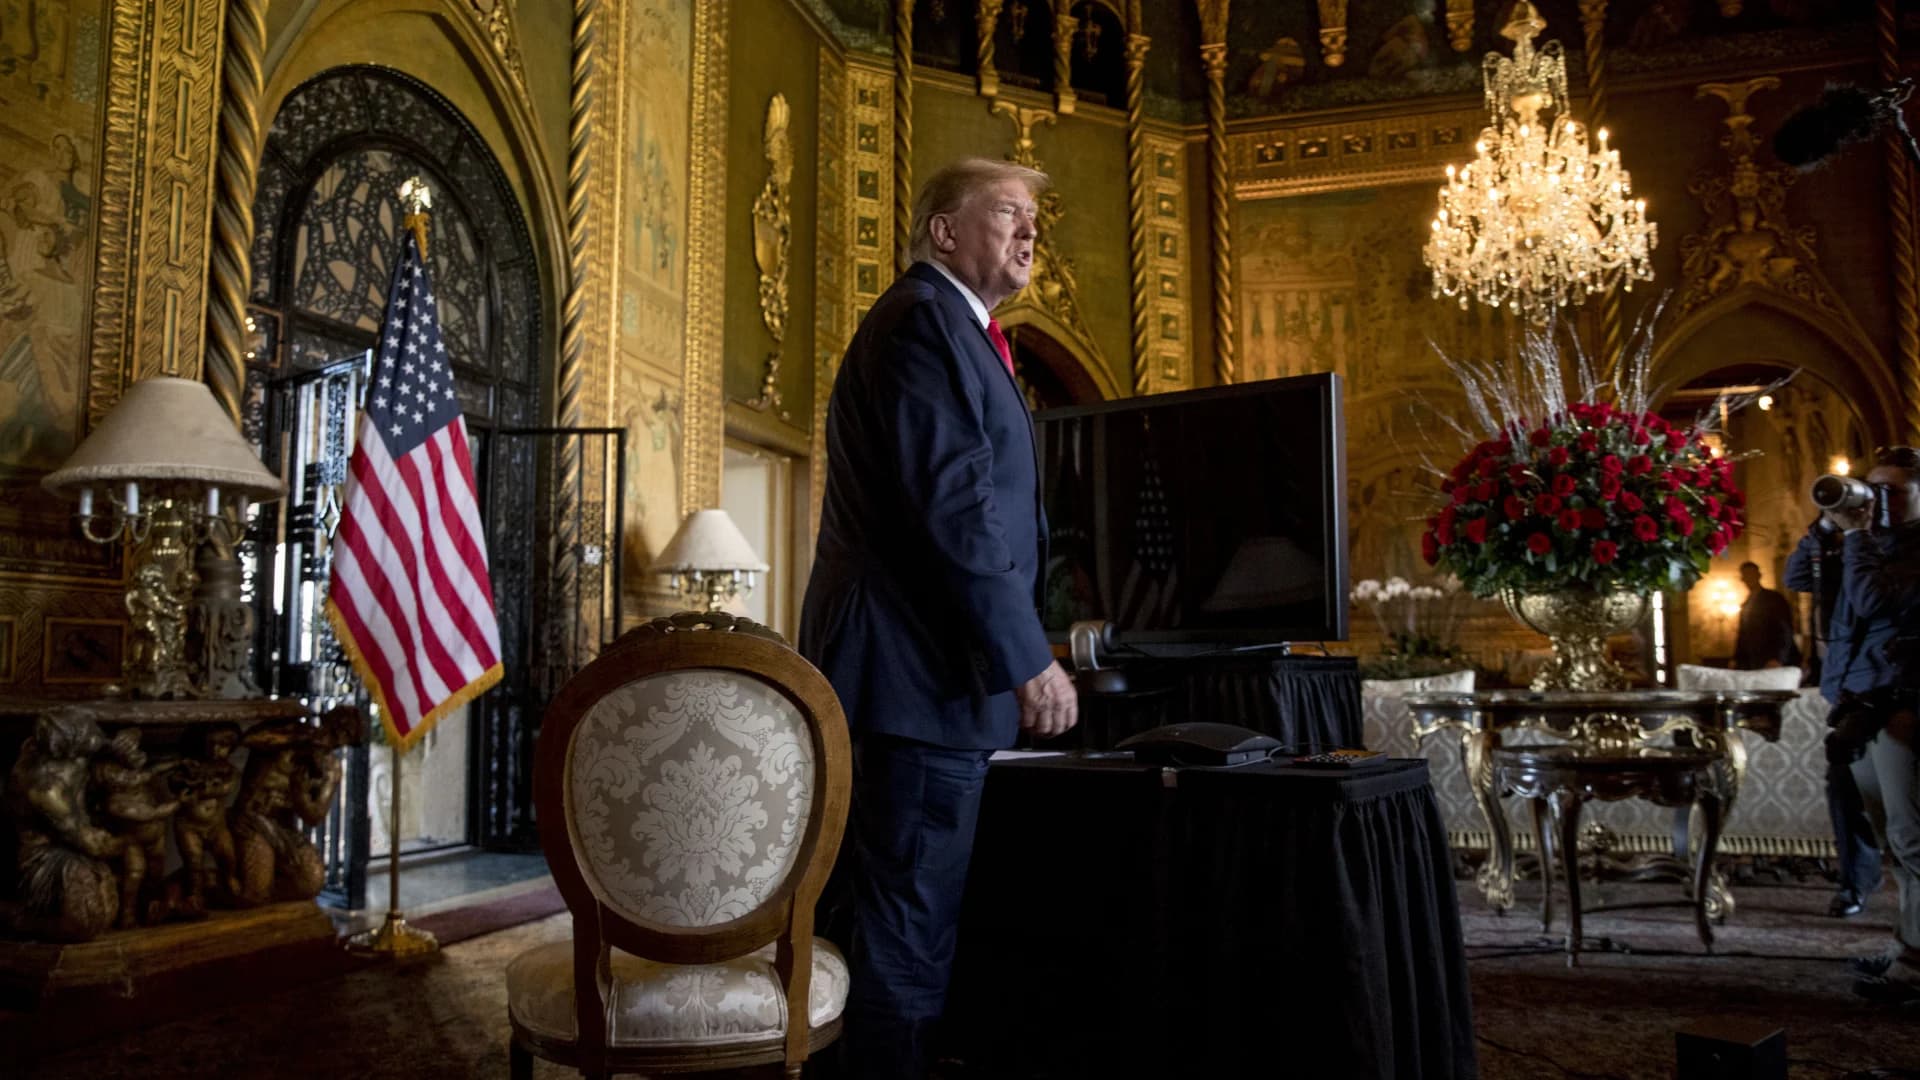 National Archives: Trump took classified items to Mar-a-Lago